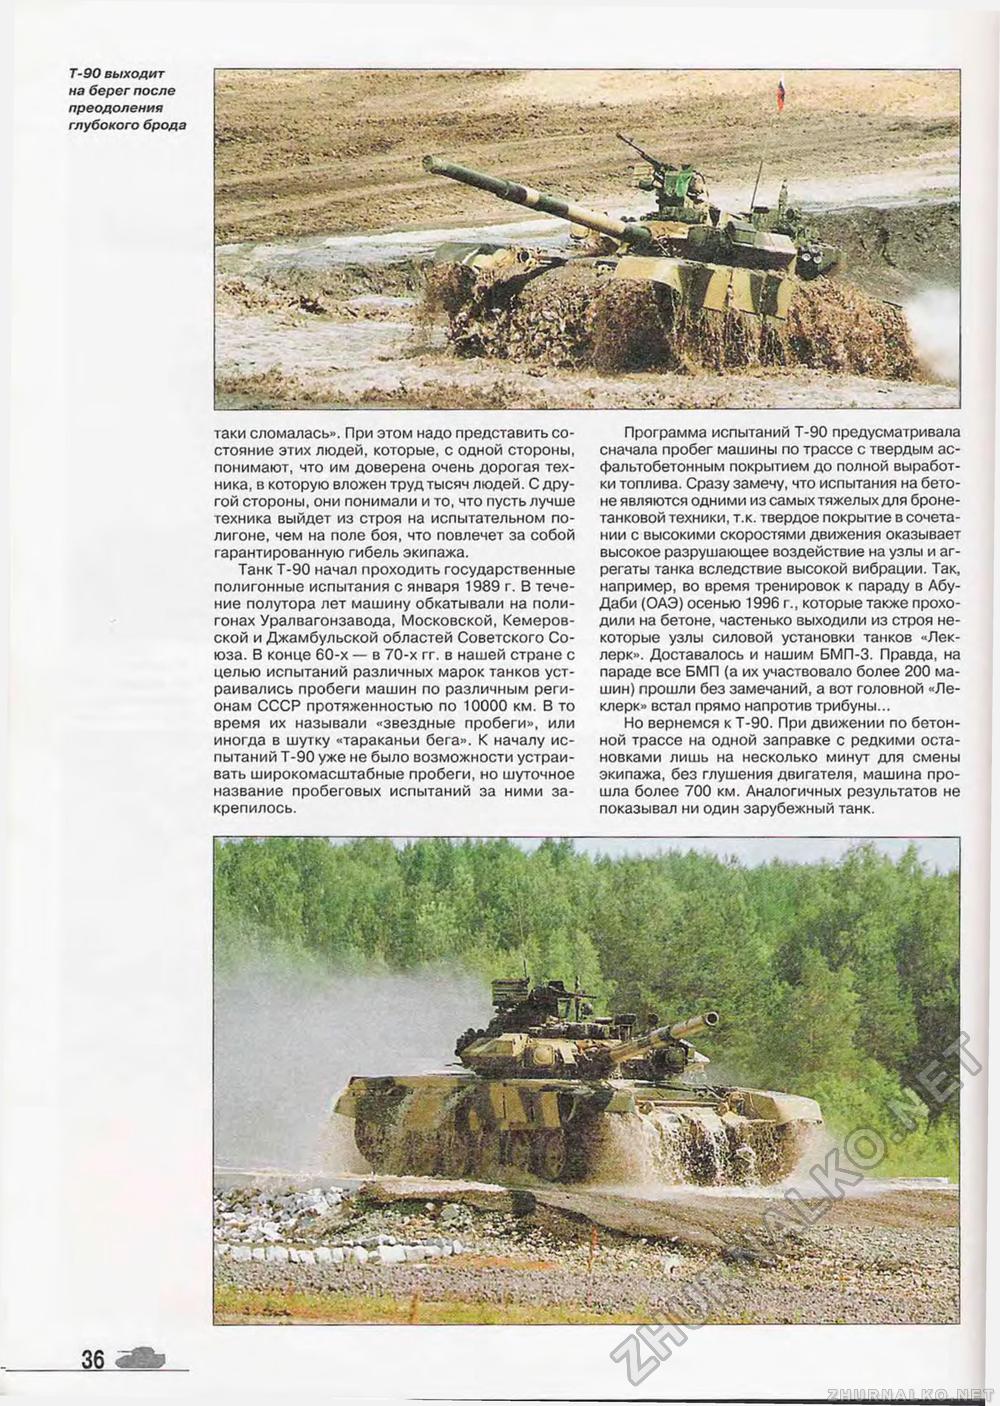  Special - T-90,  38